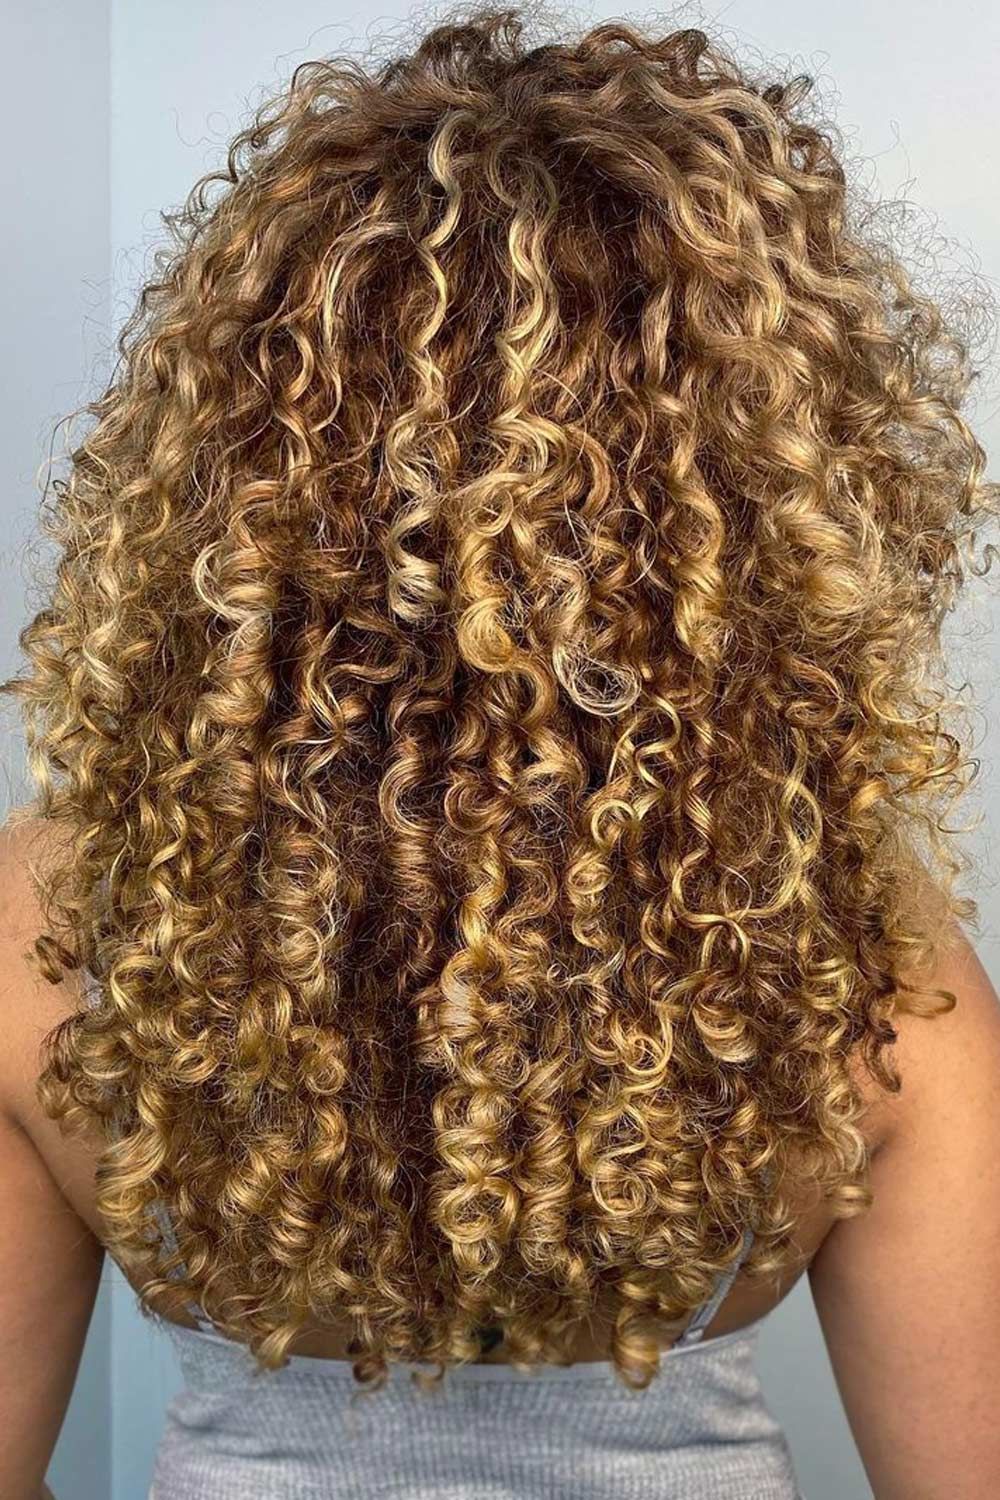 Stacked layers of curls make an incredibly impactful hair look.